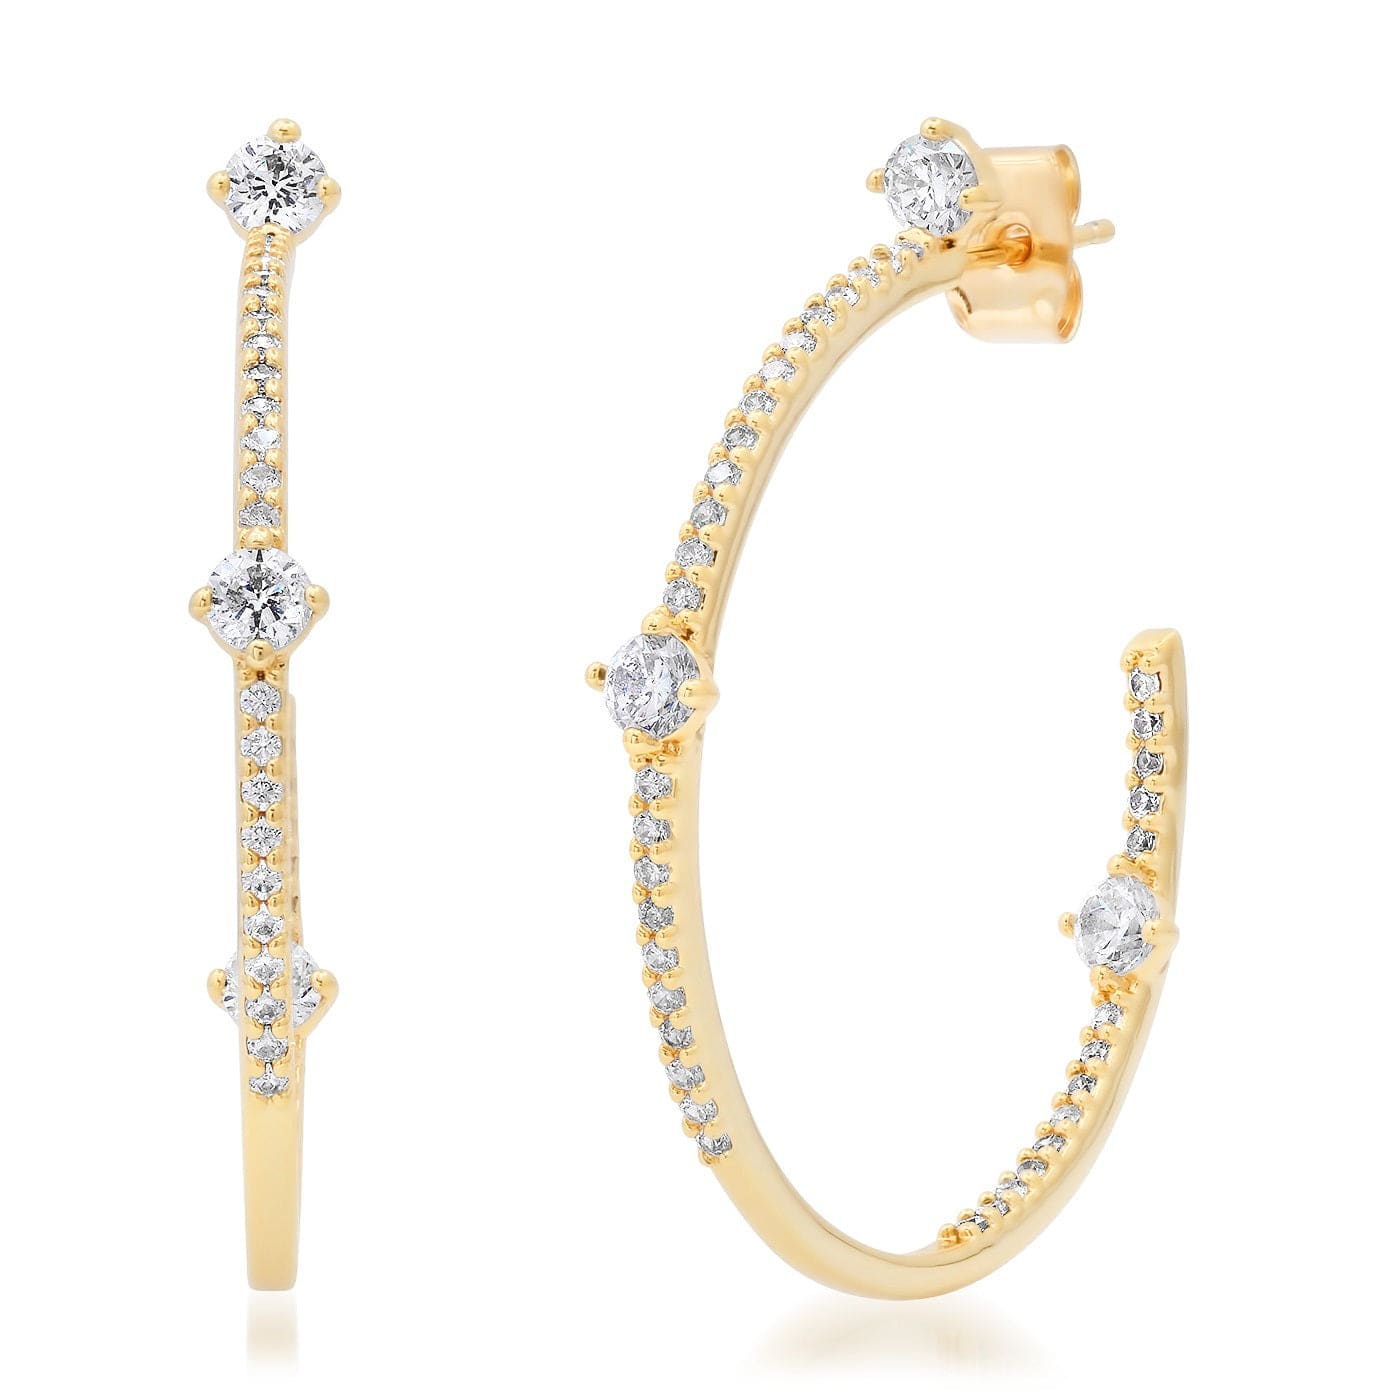 TAI JEWELRY Earrings Pave Hoops with CZ Stations